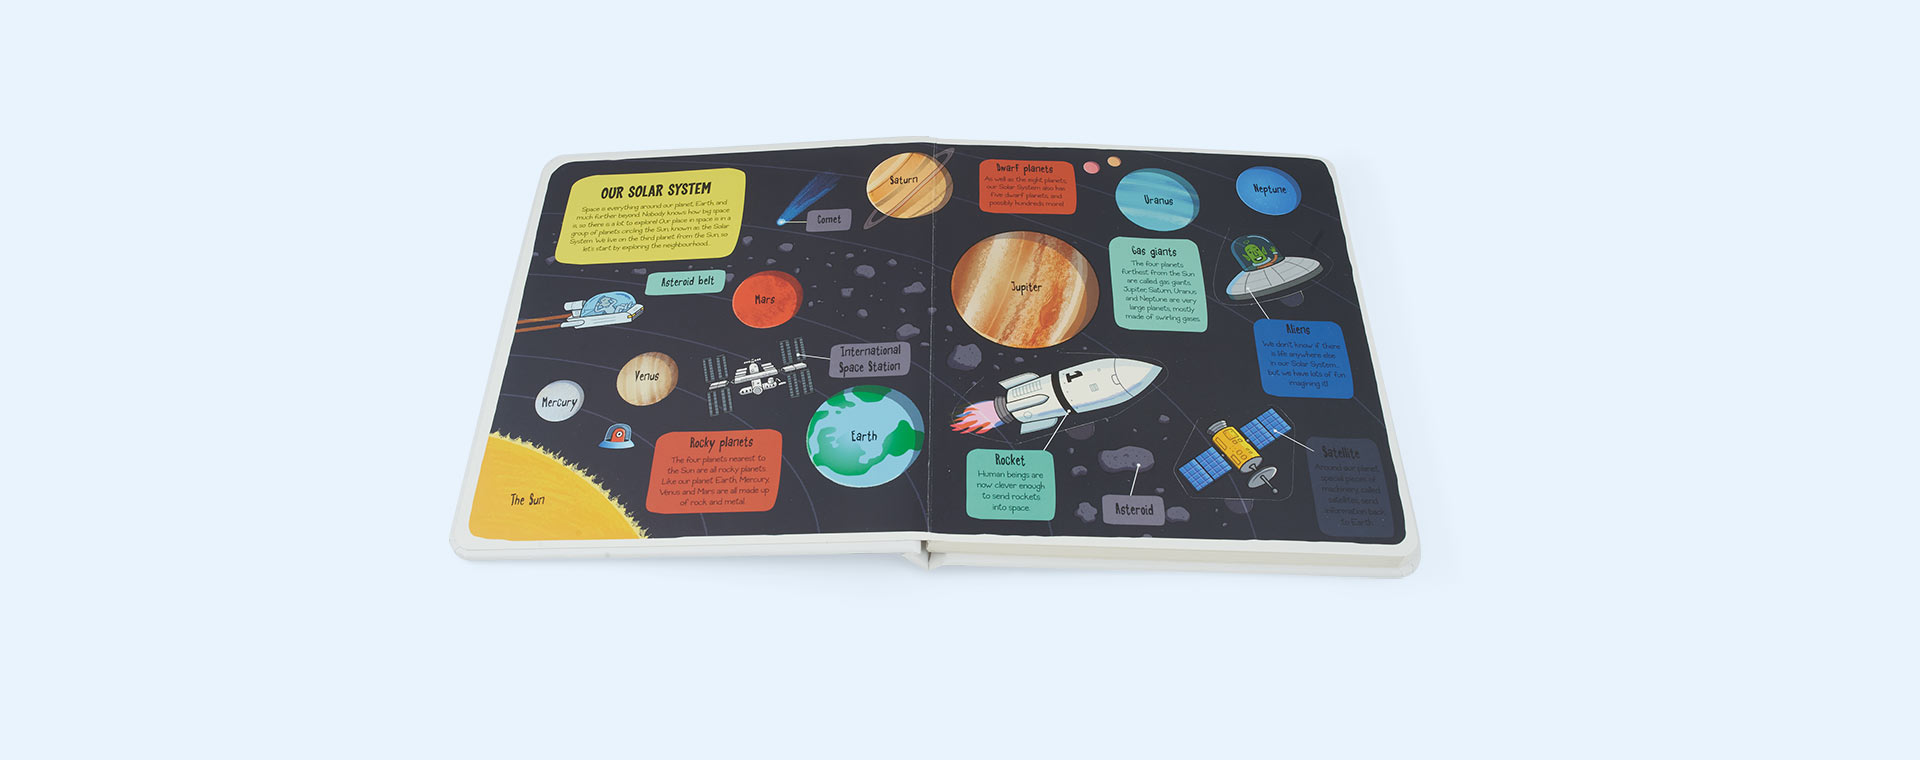 Outer Space bookspeed Little Explorers: Outer Space